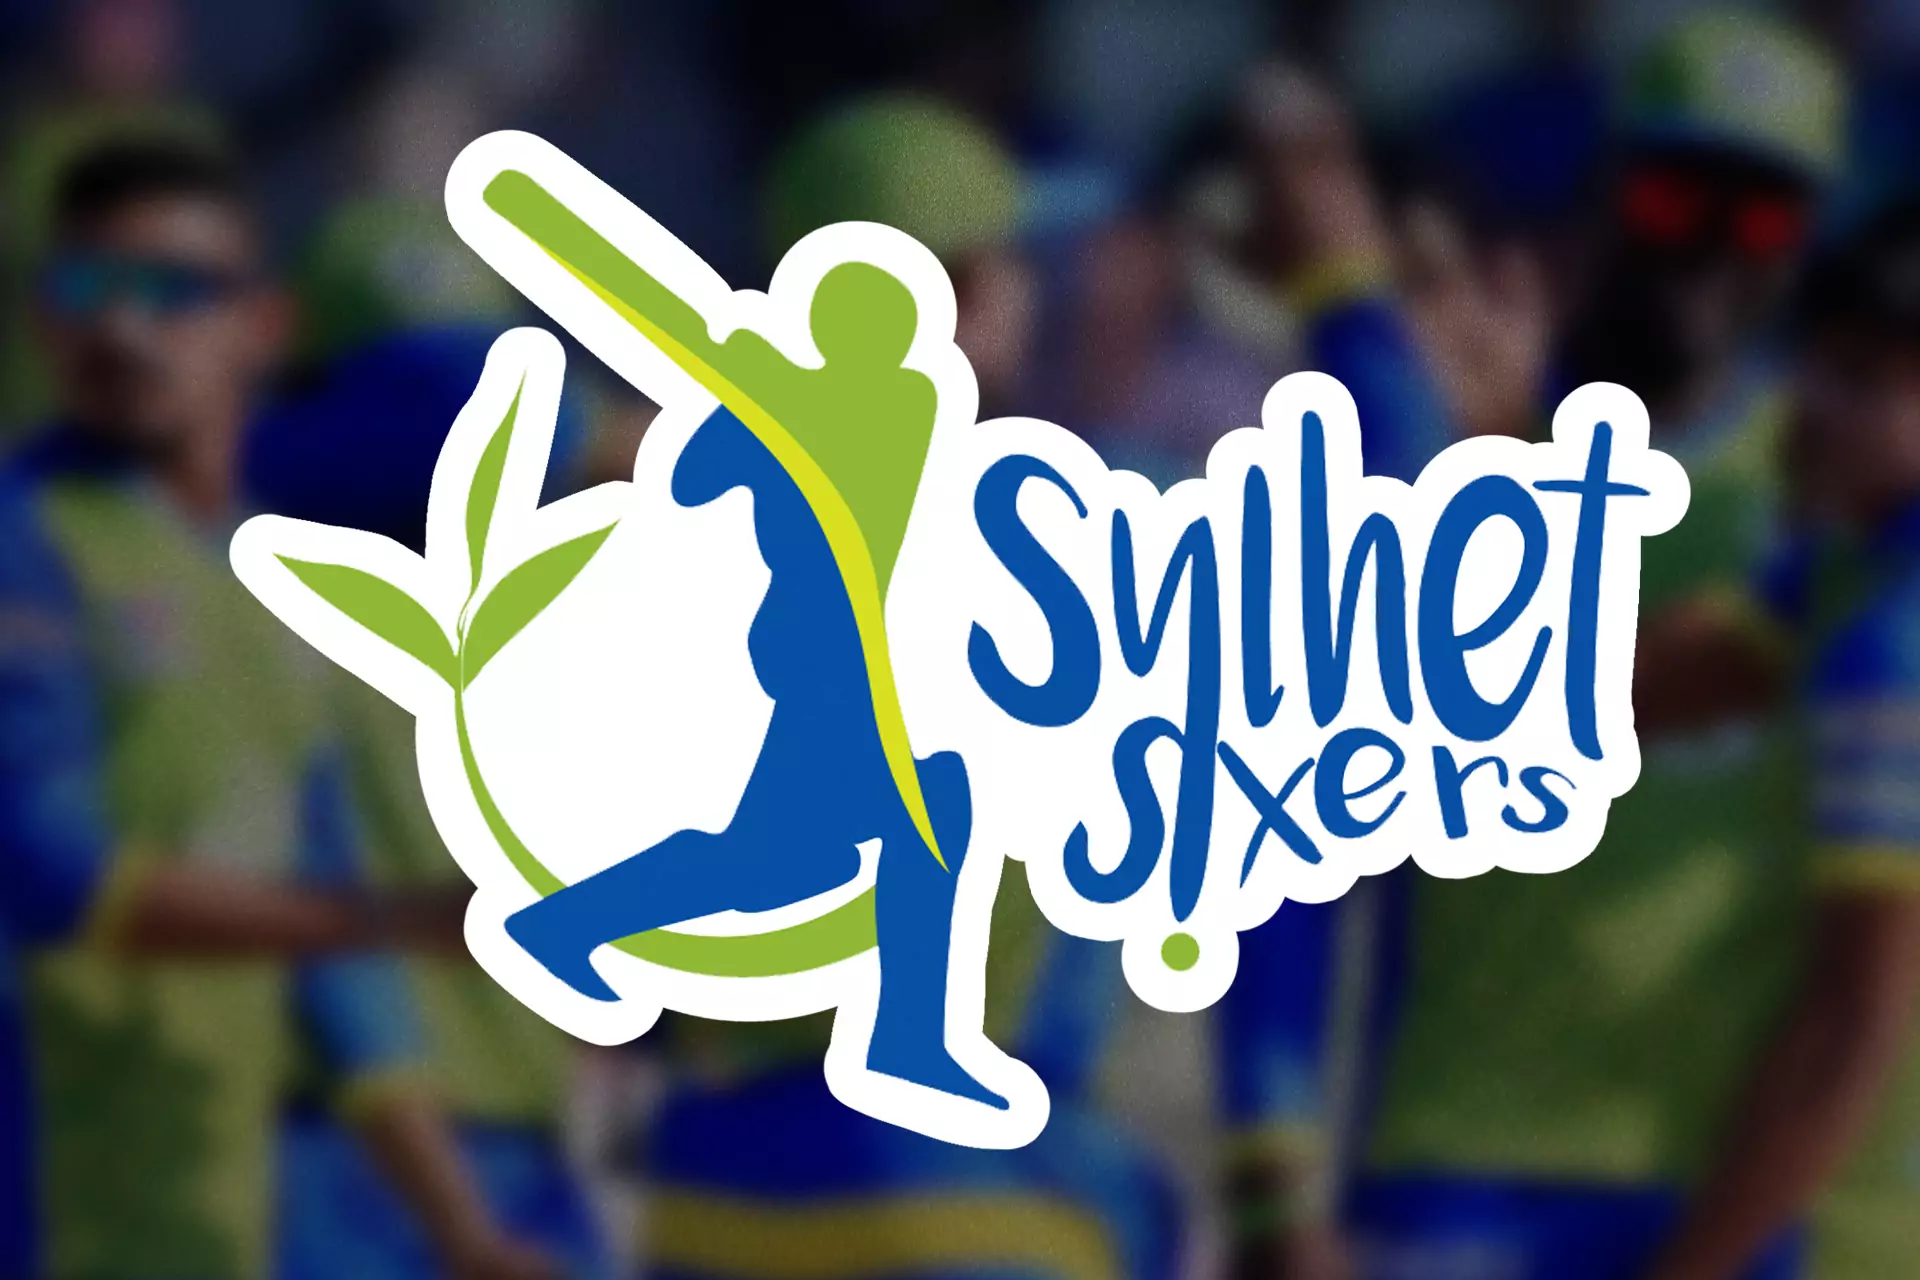 The Sylhet Sixers joined the Bangladesh Premier League in 2017.